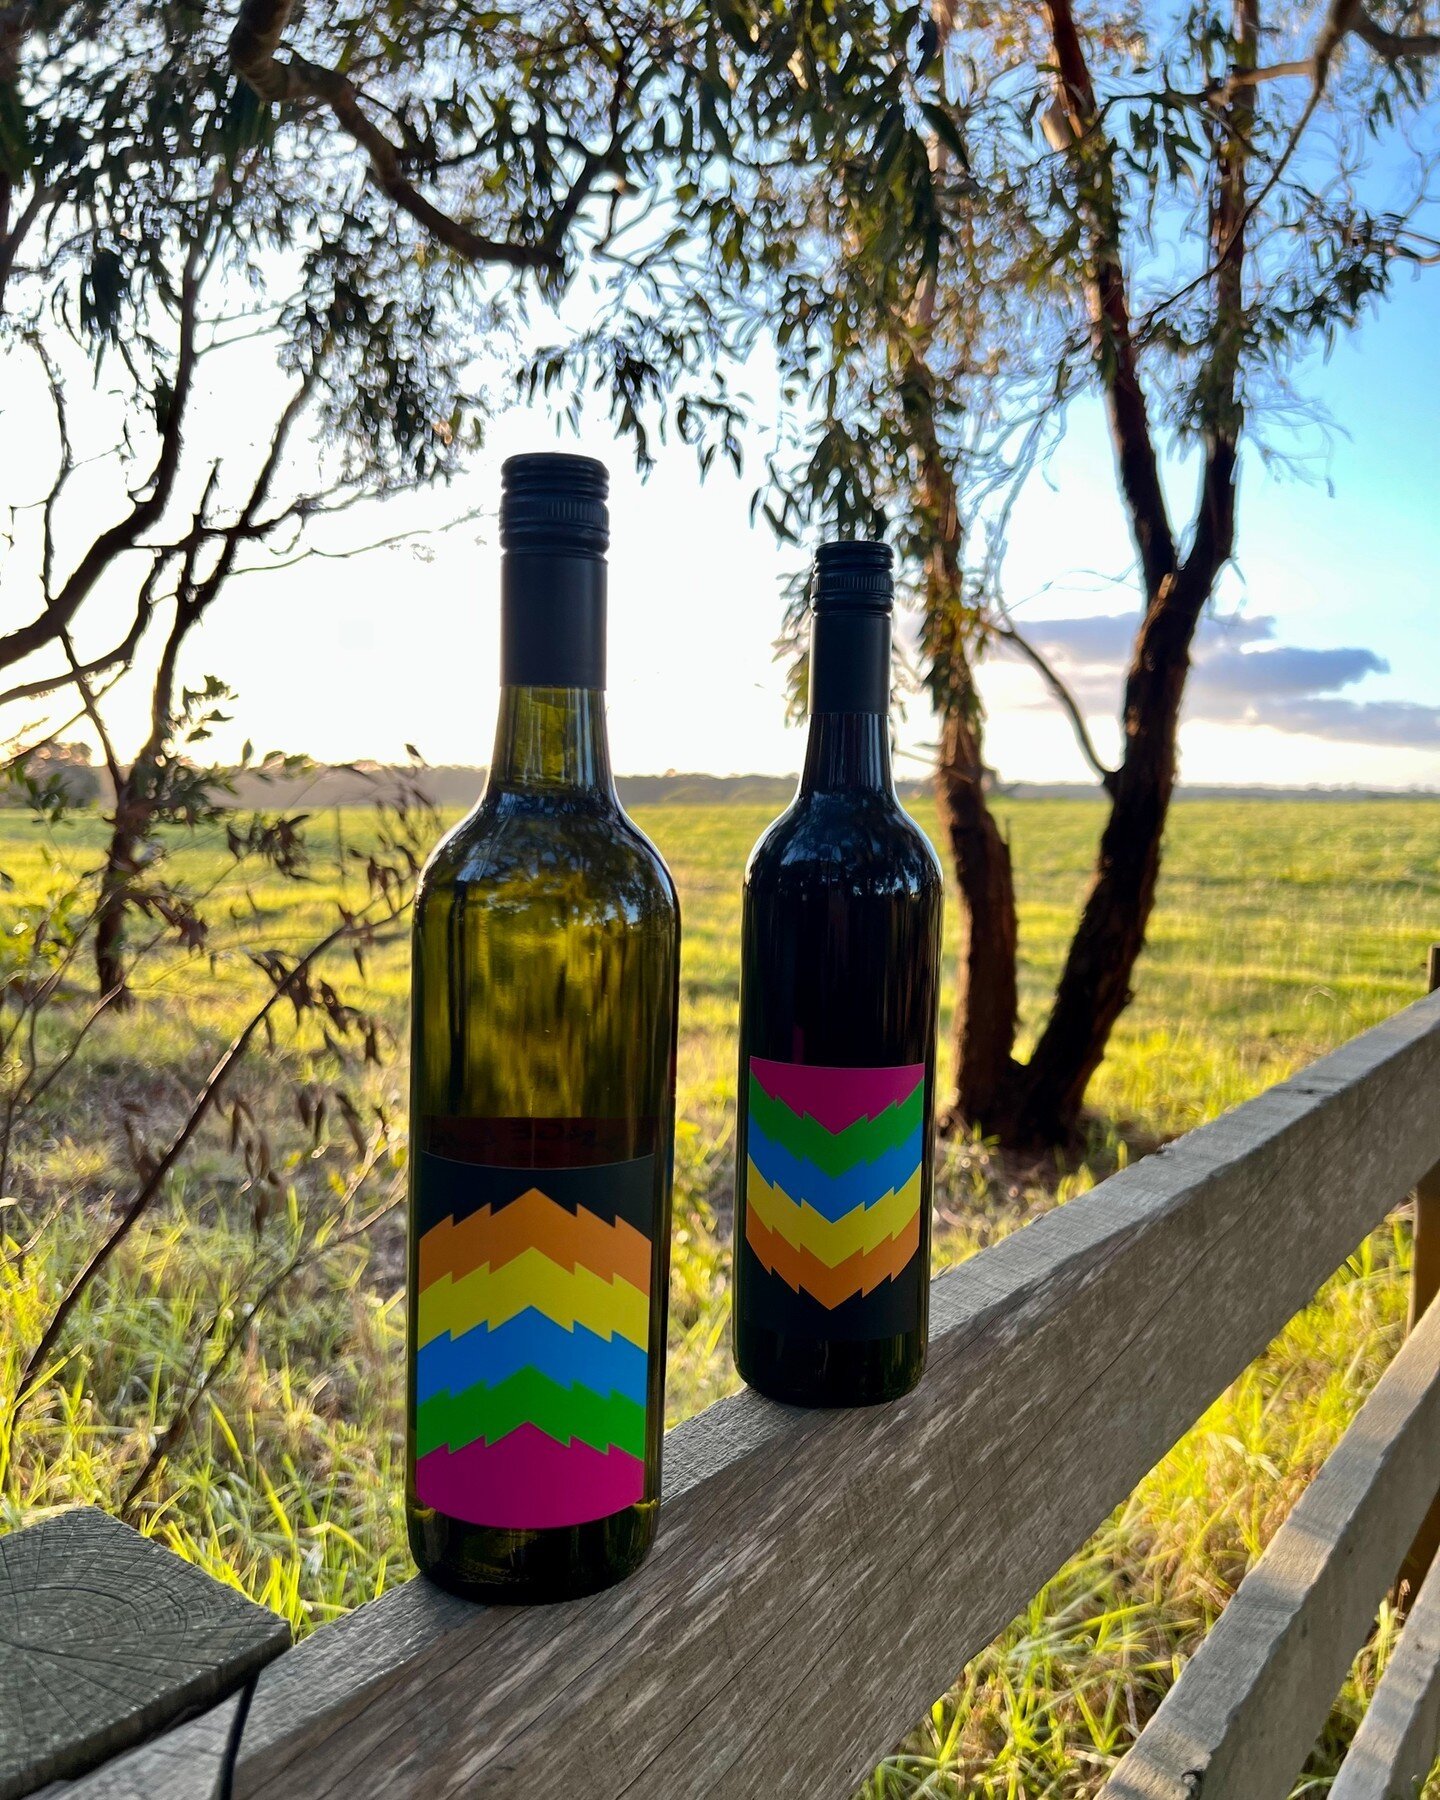 Bring on the weekend!

Oh have you tried our next wines yet? Our Fiano and Rosso? Thoughts? 

#rangelifewine #funwine #victorianwine #winelover #winetime #wine #everyoccation #italiangrape #instawine #winelife #newwine #fiano #rosso #weekend